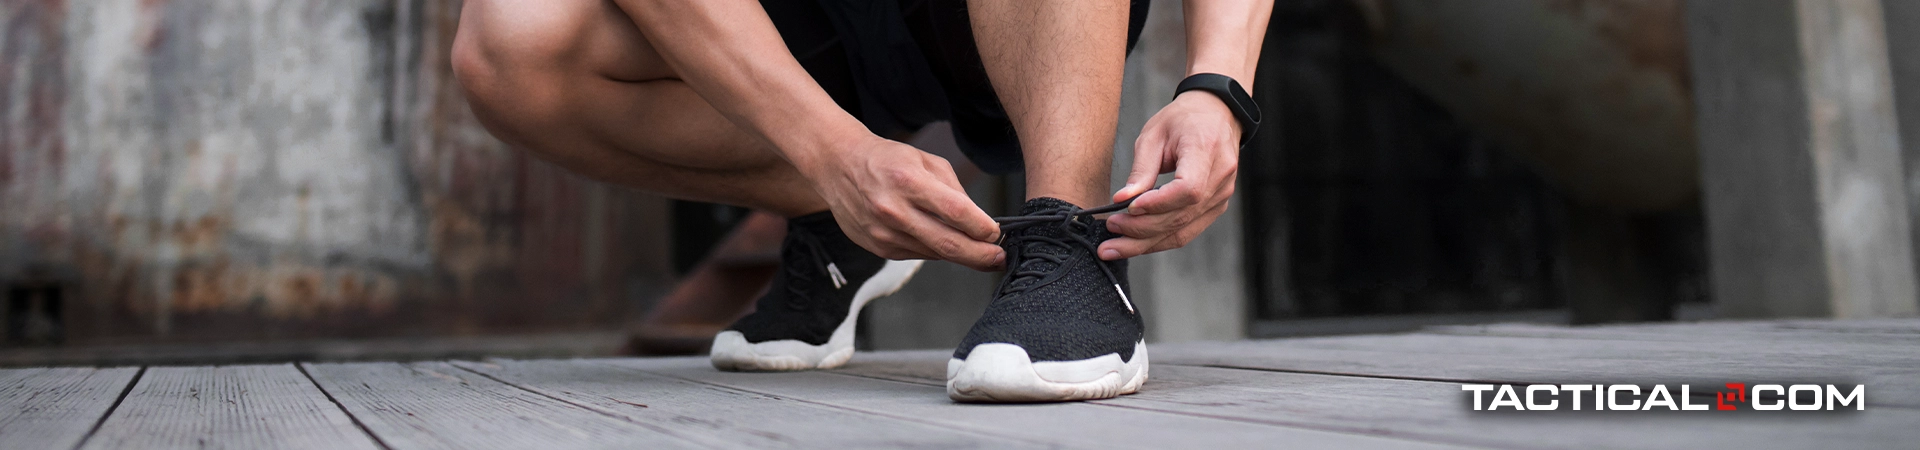 how to prevent blisters on feet? start with the right footwear